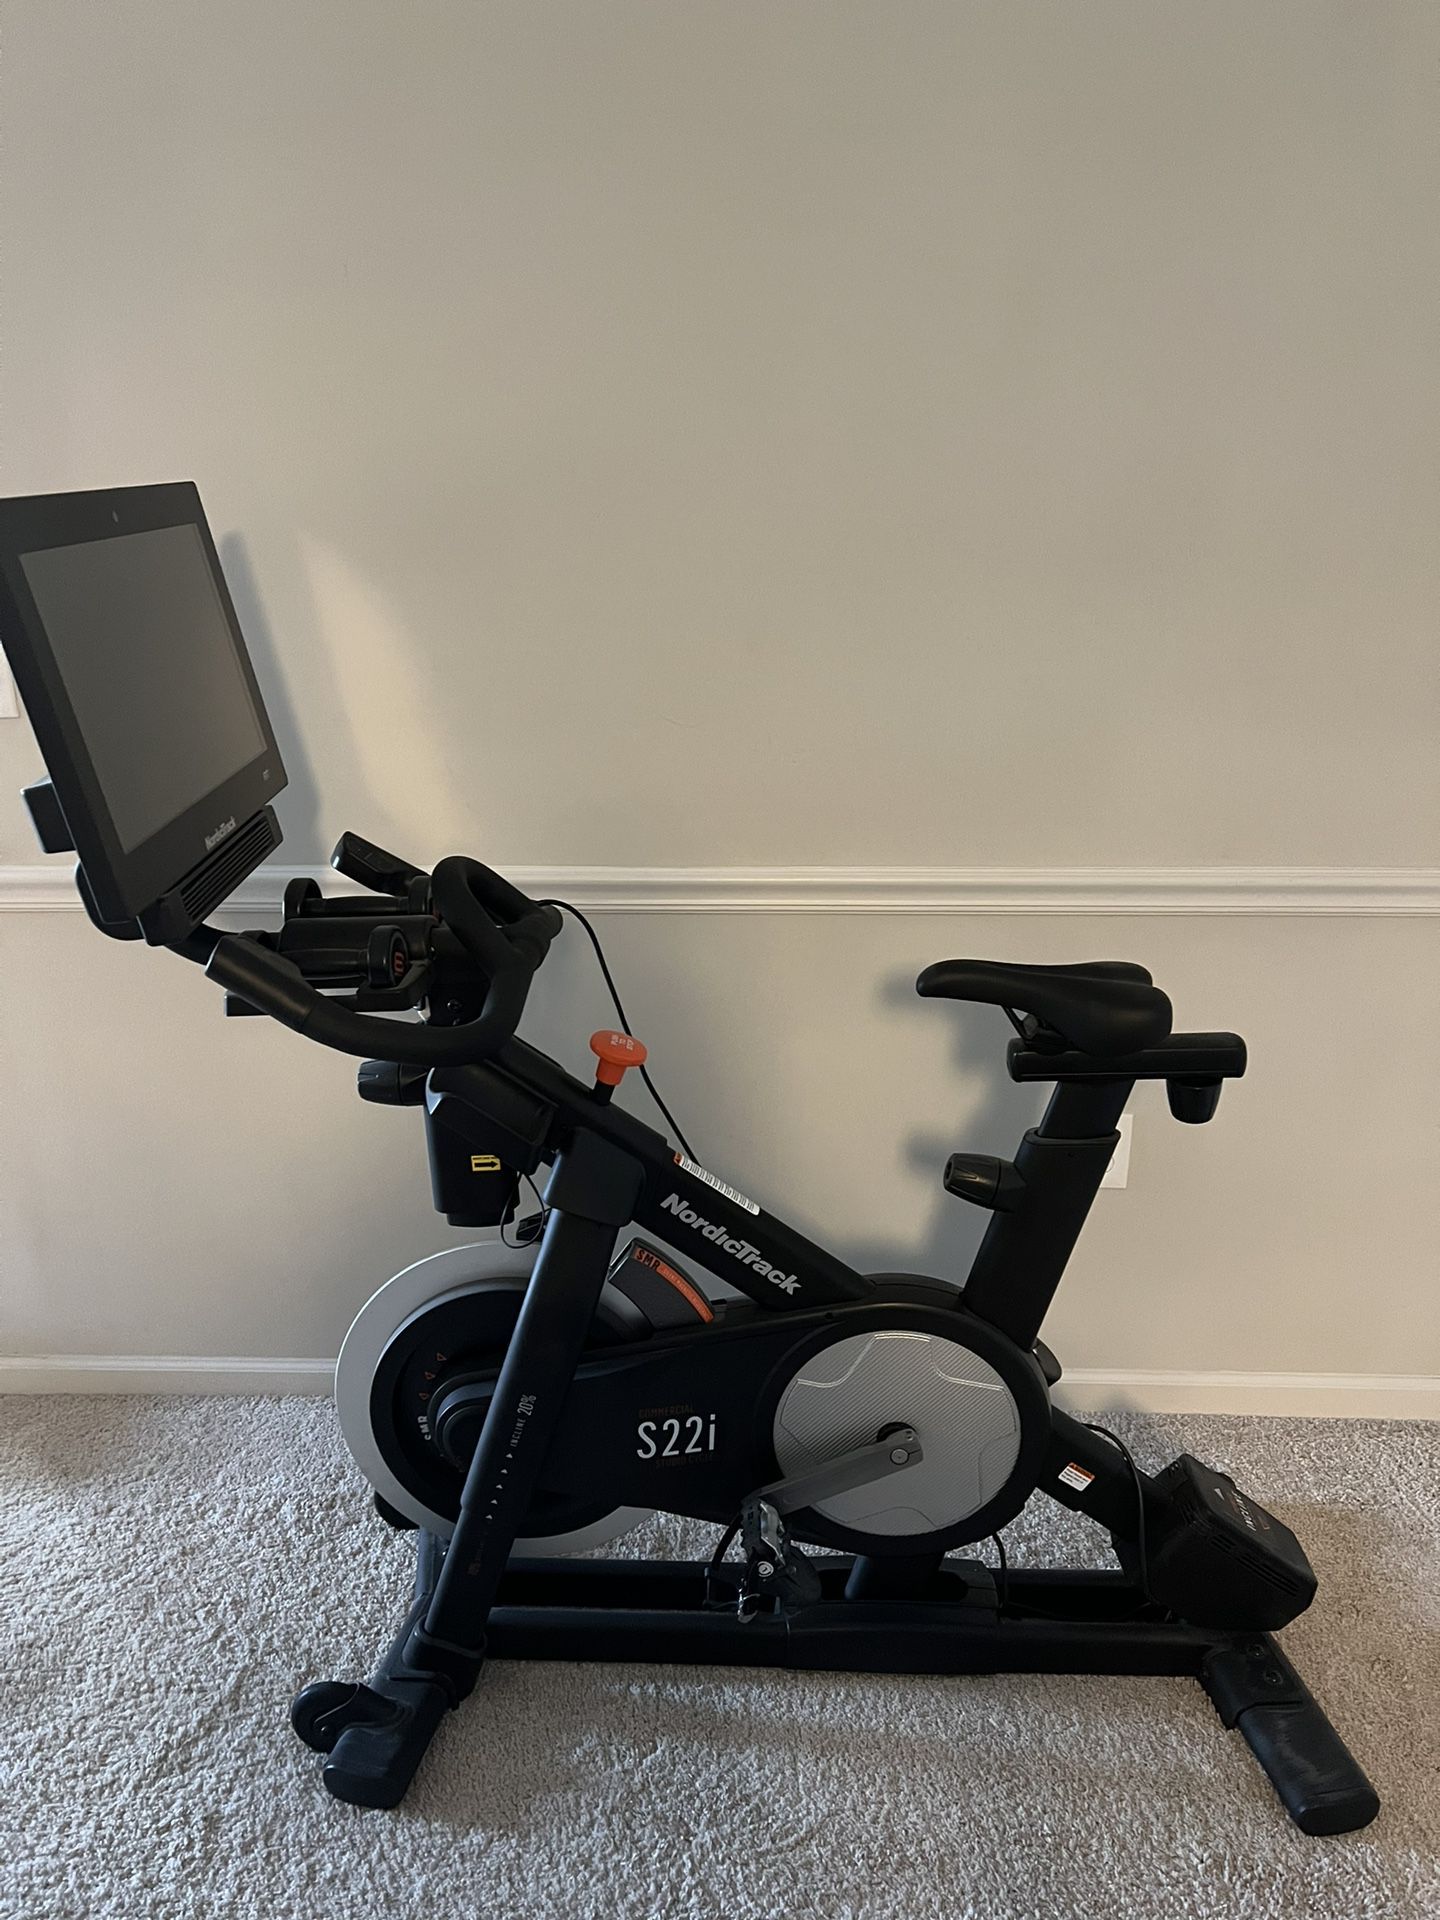 Nordic Track Exercise Bike With Screen